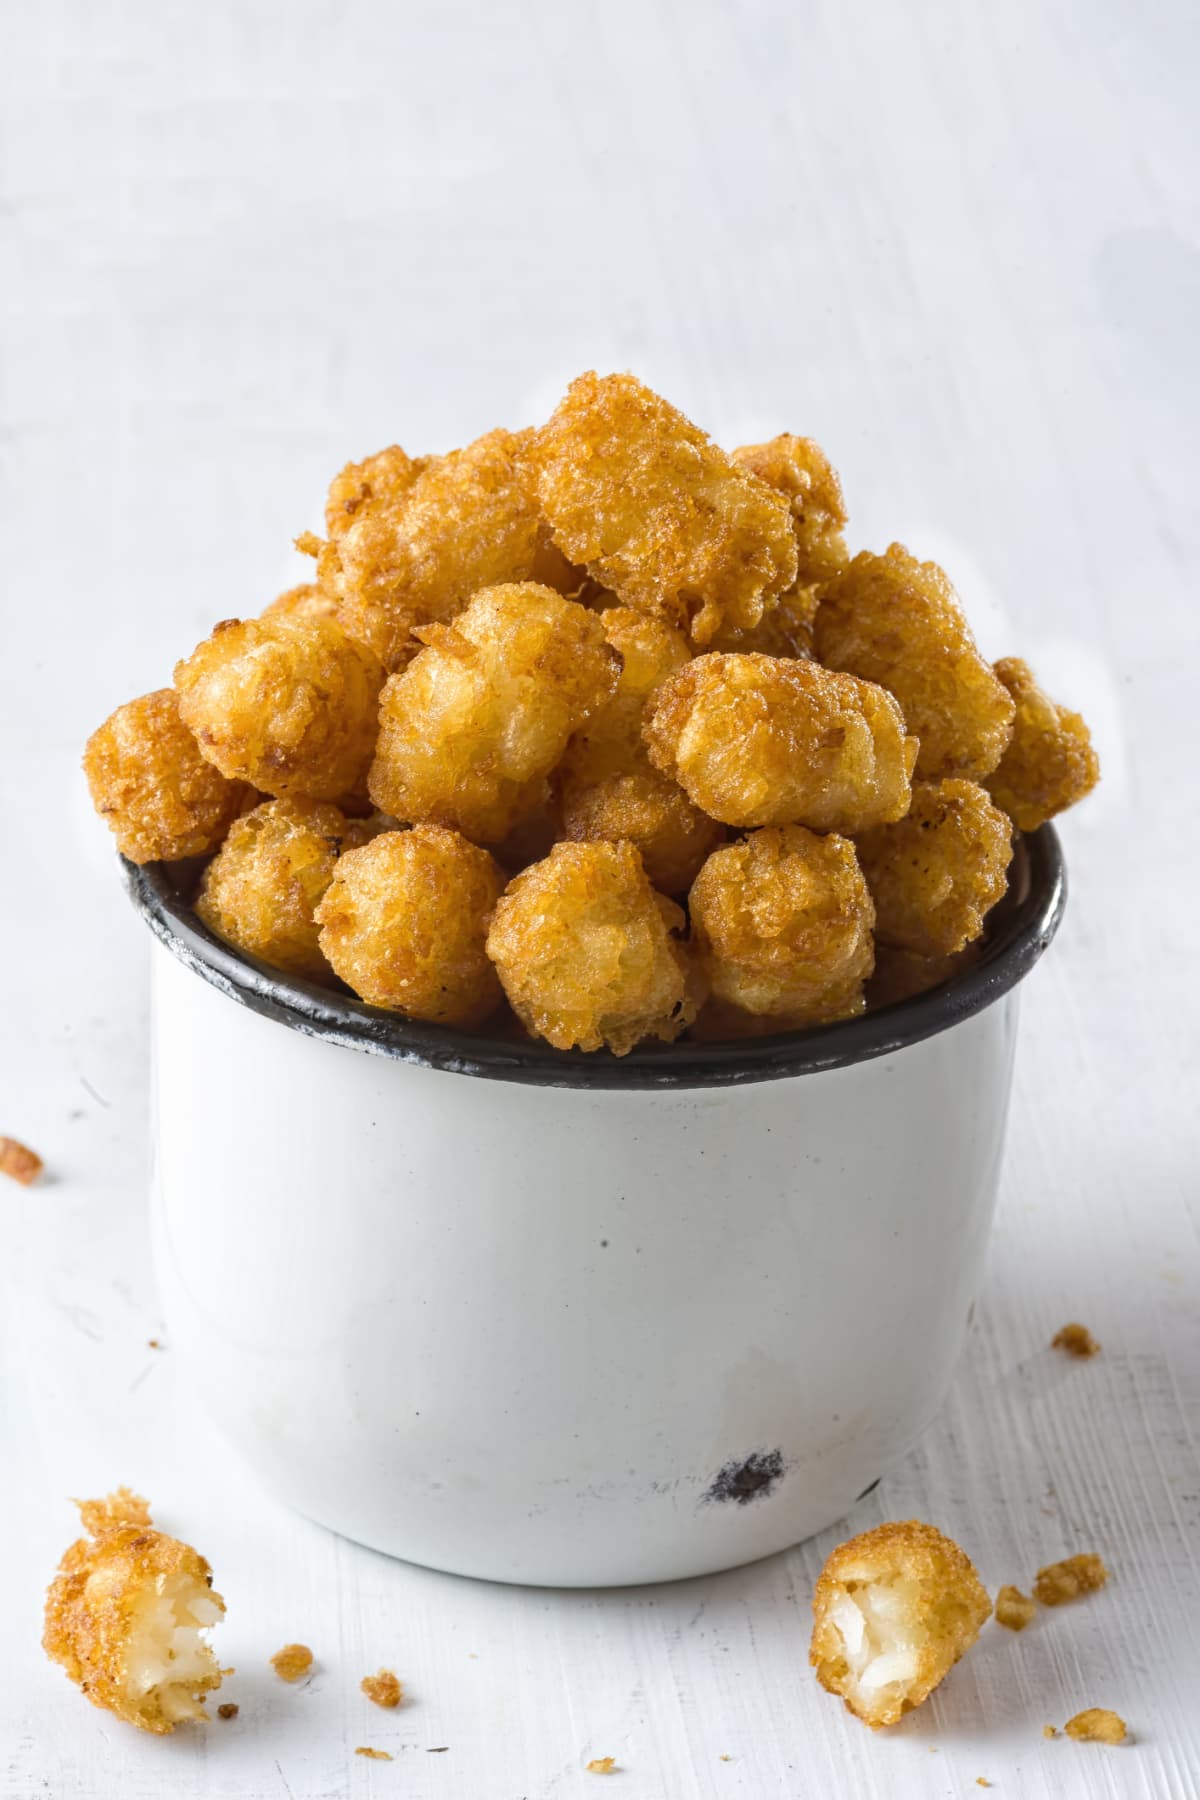 Cup piled with tater tots